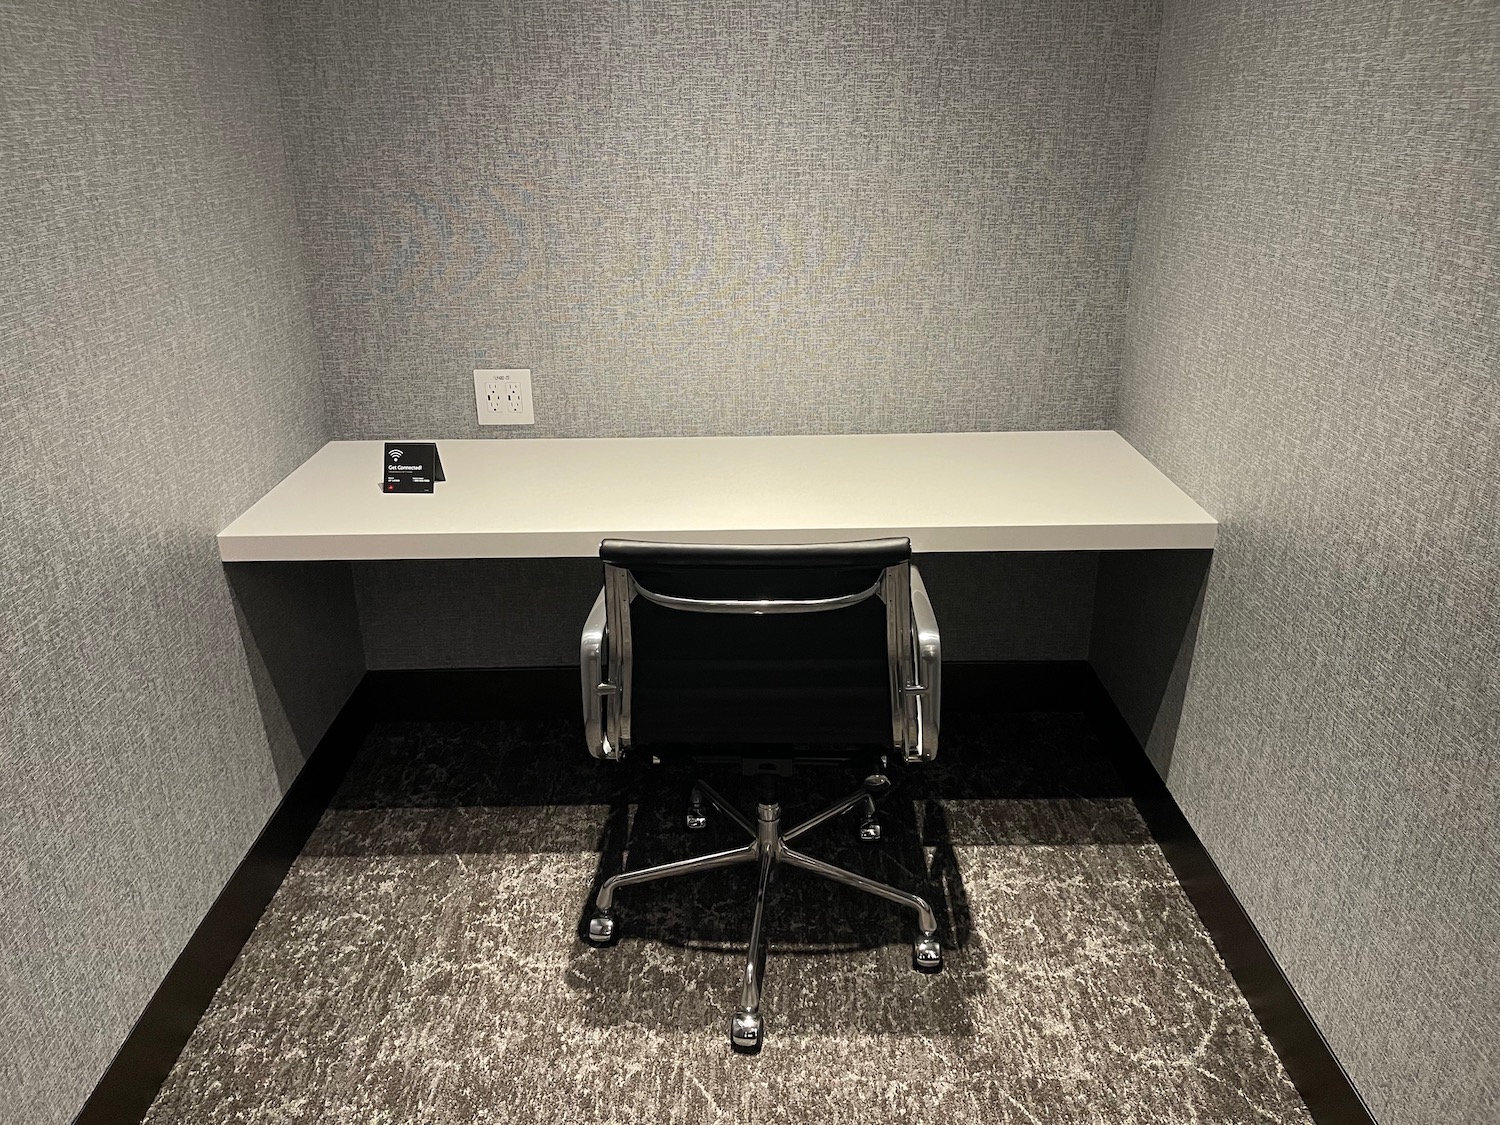 a chair and desk in a room